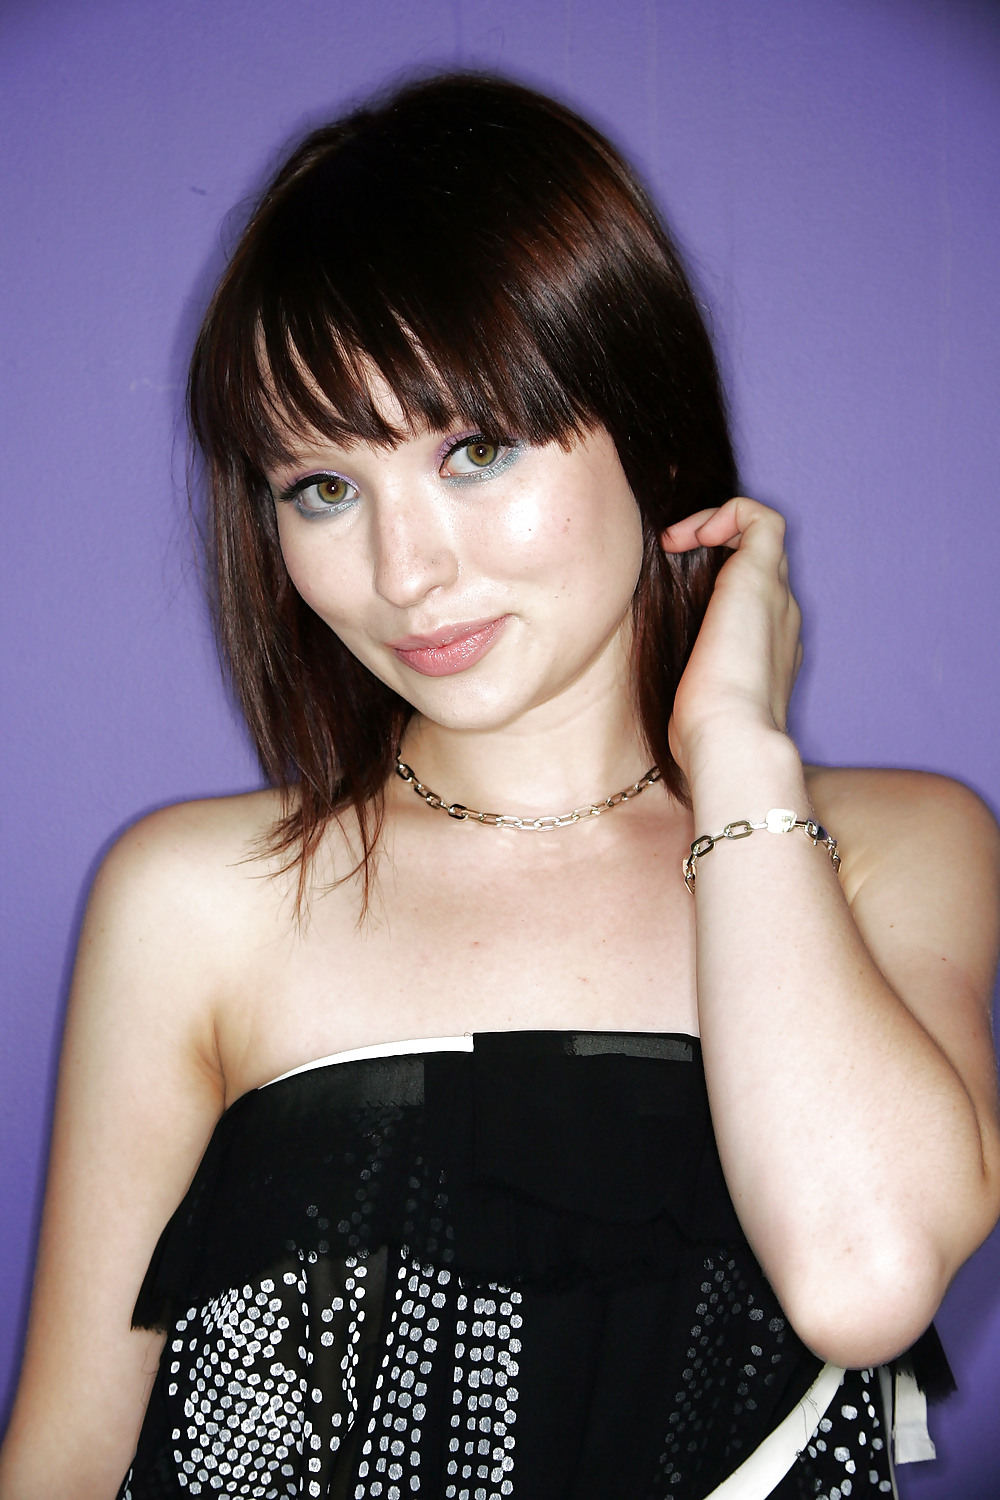 Emily browning collezione nudo finale
 #13047518